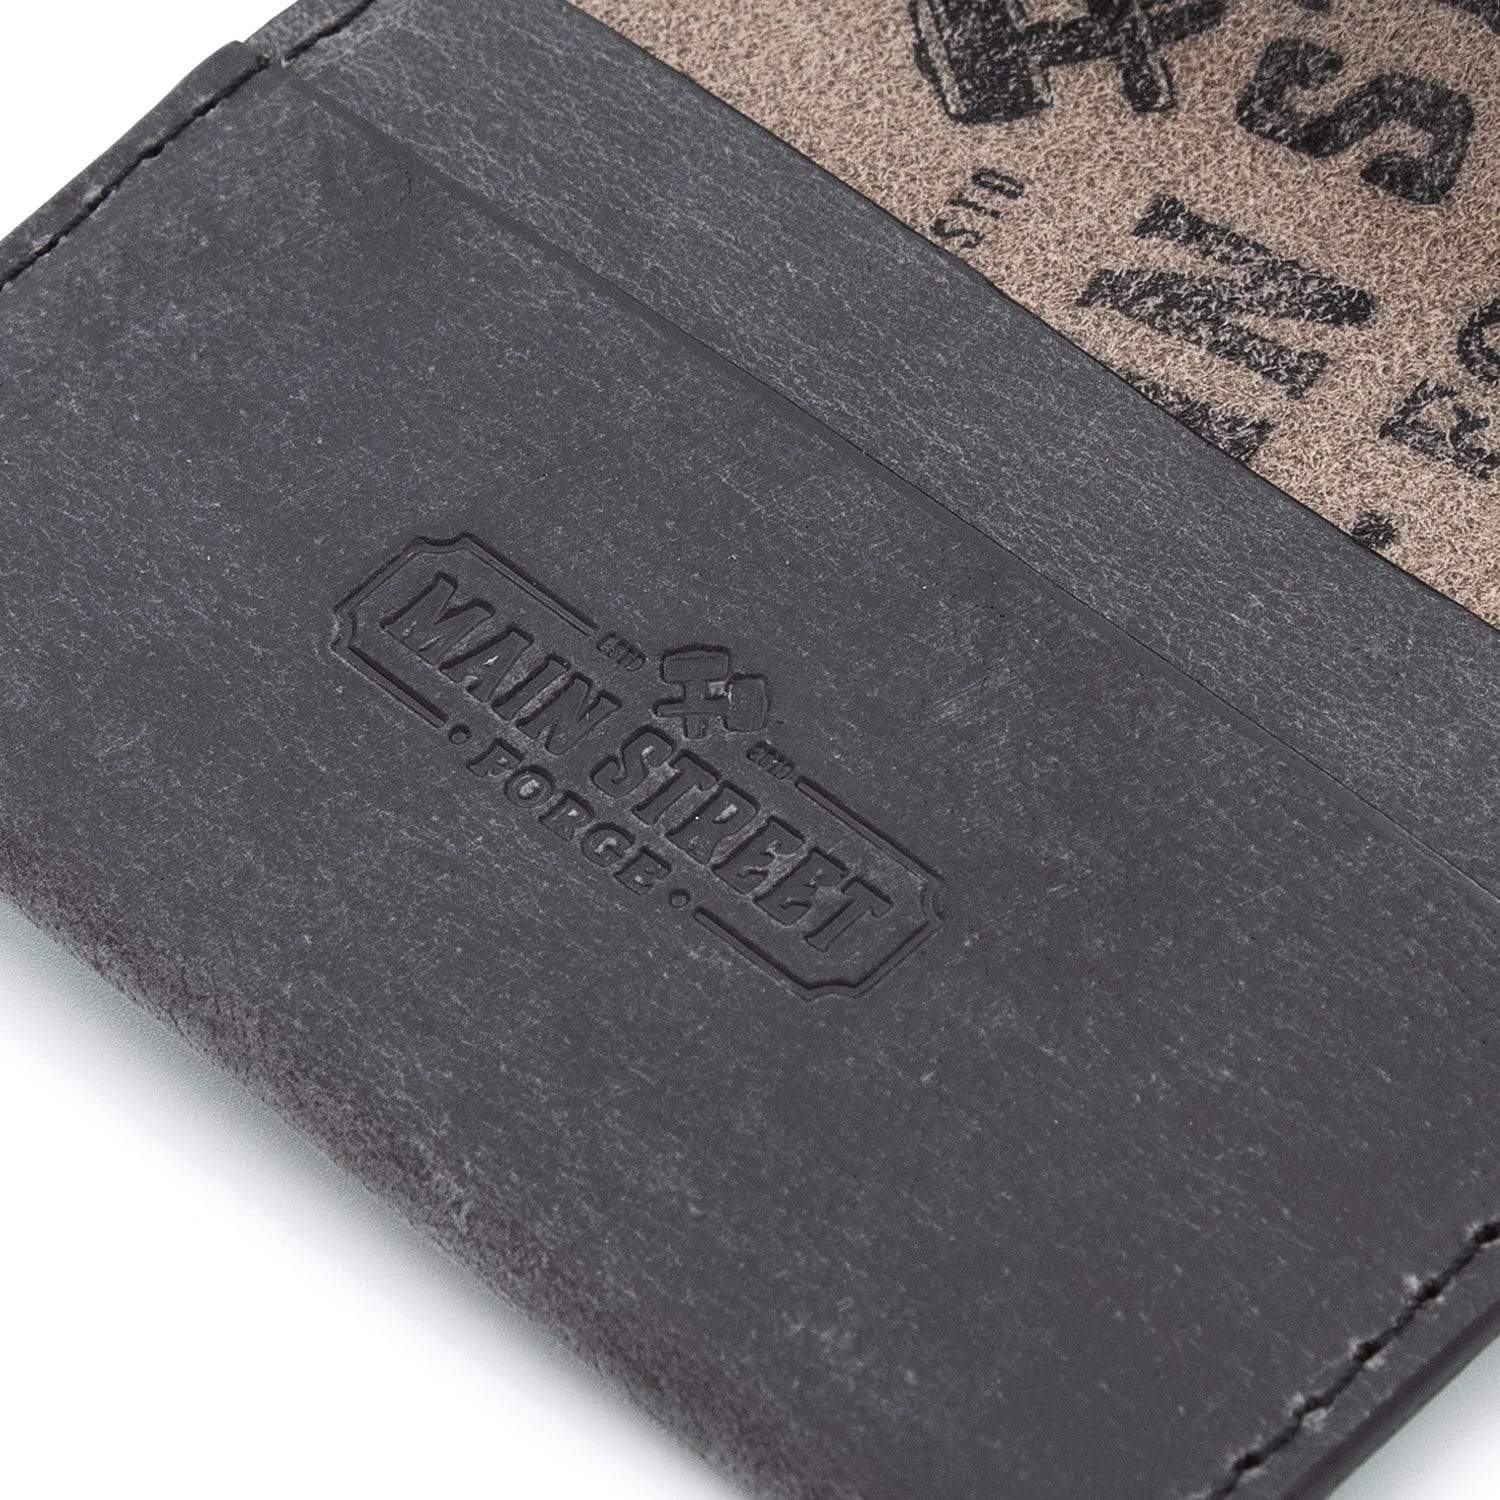 Black Wallets & Card Cases for Women